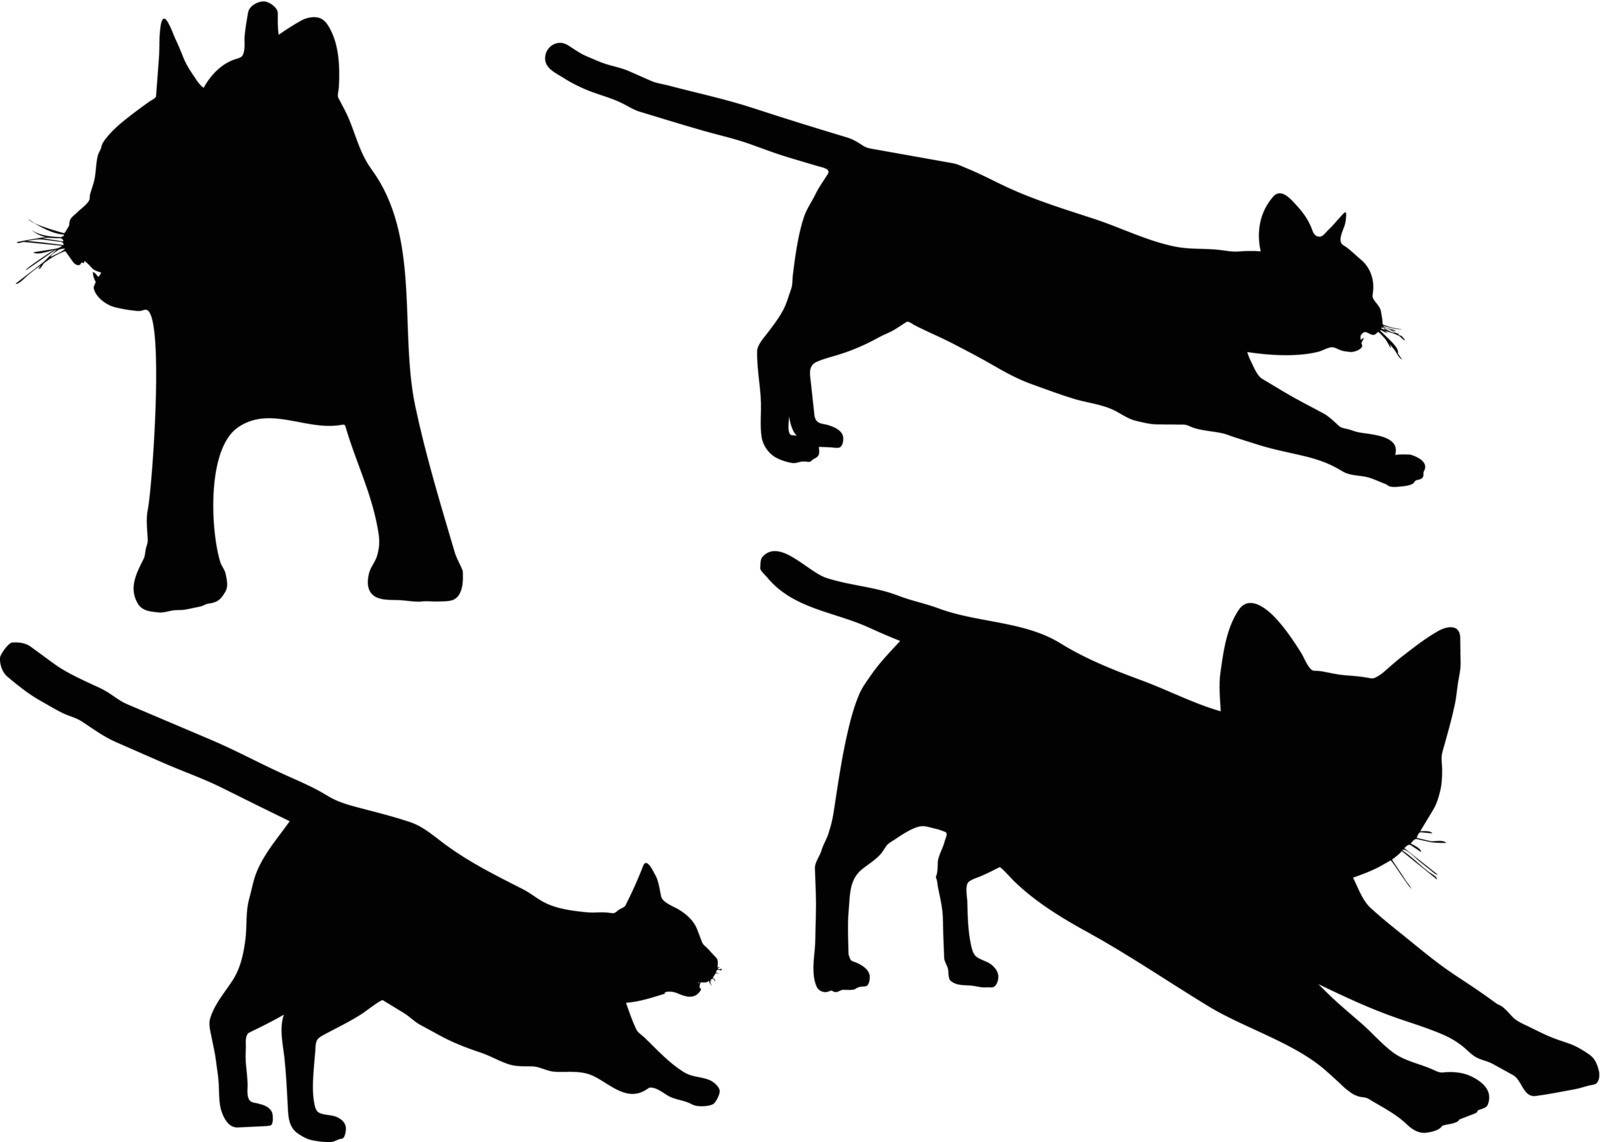 Cats collection - vector silhouette by Istanbul2009